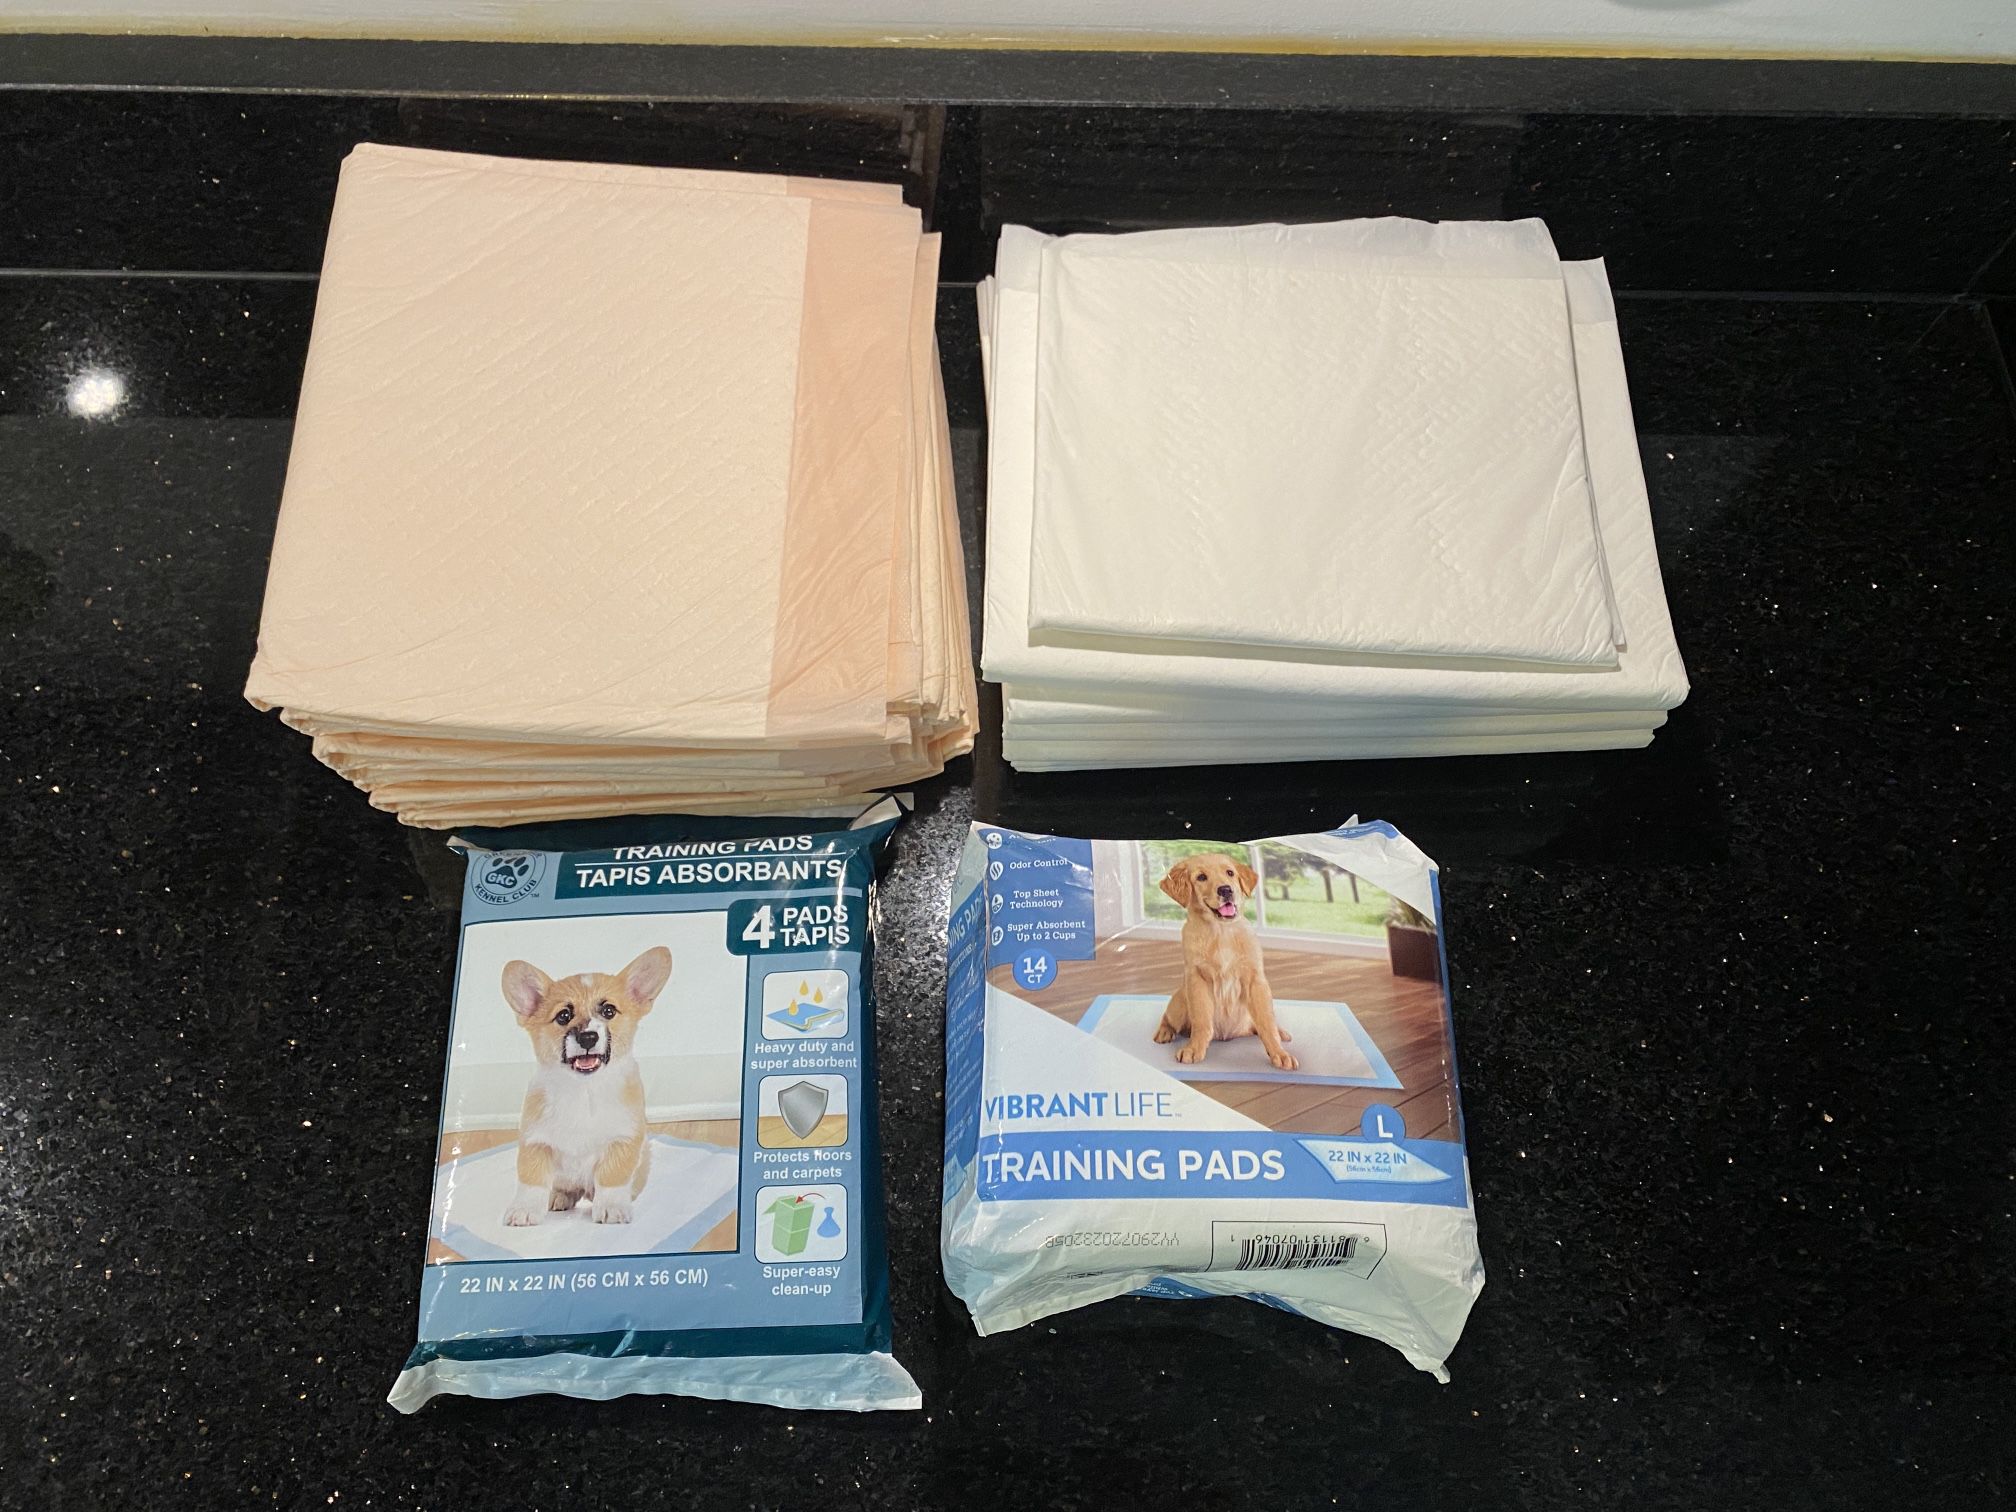 31 Dog Training Pads: 18 Large Pads 22X22” in Bags & 13 XLarge Loose Pads 26x32”